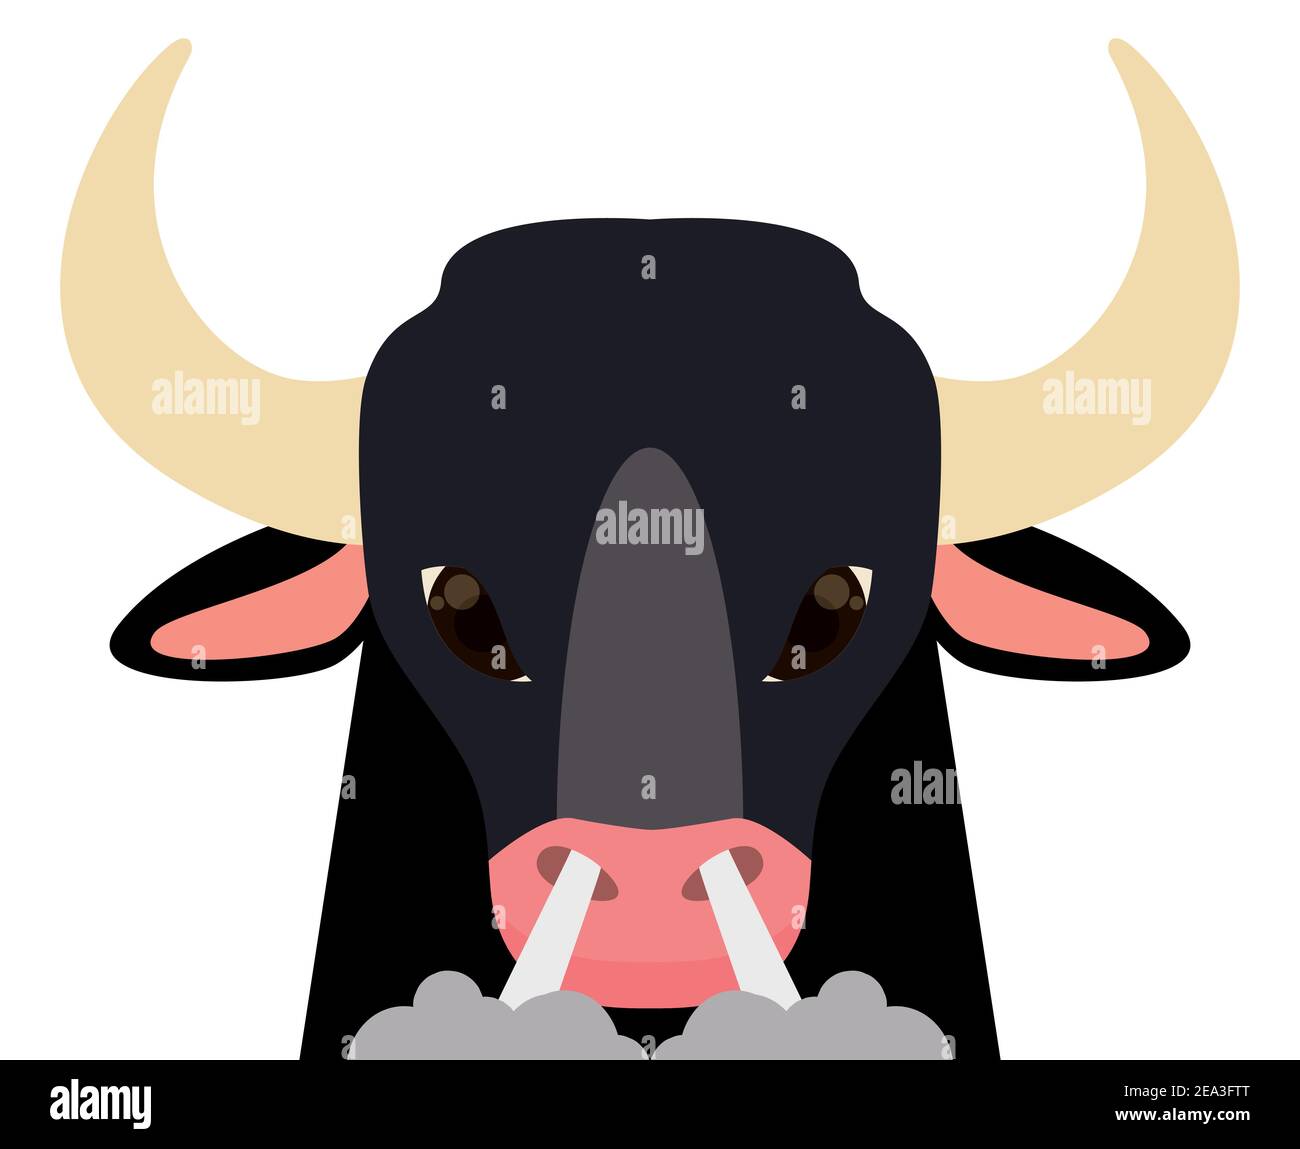 Furious black bull with exhalation smoke from its nose and angry look, isolated in flat style. Stock Vector